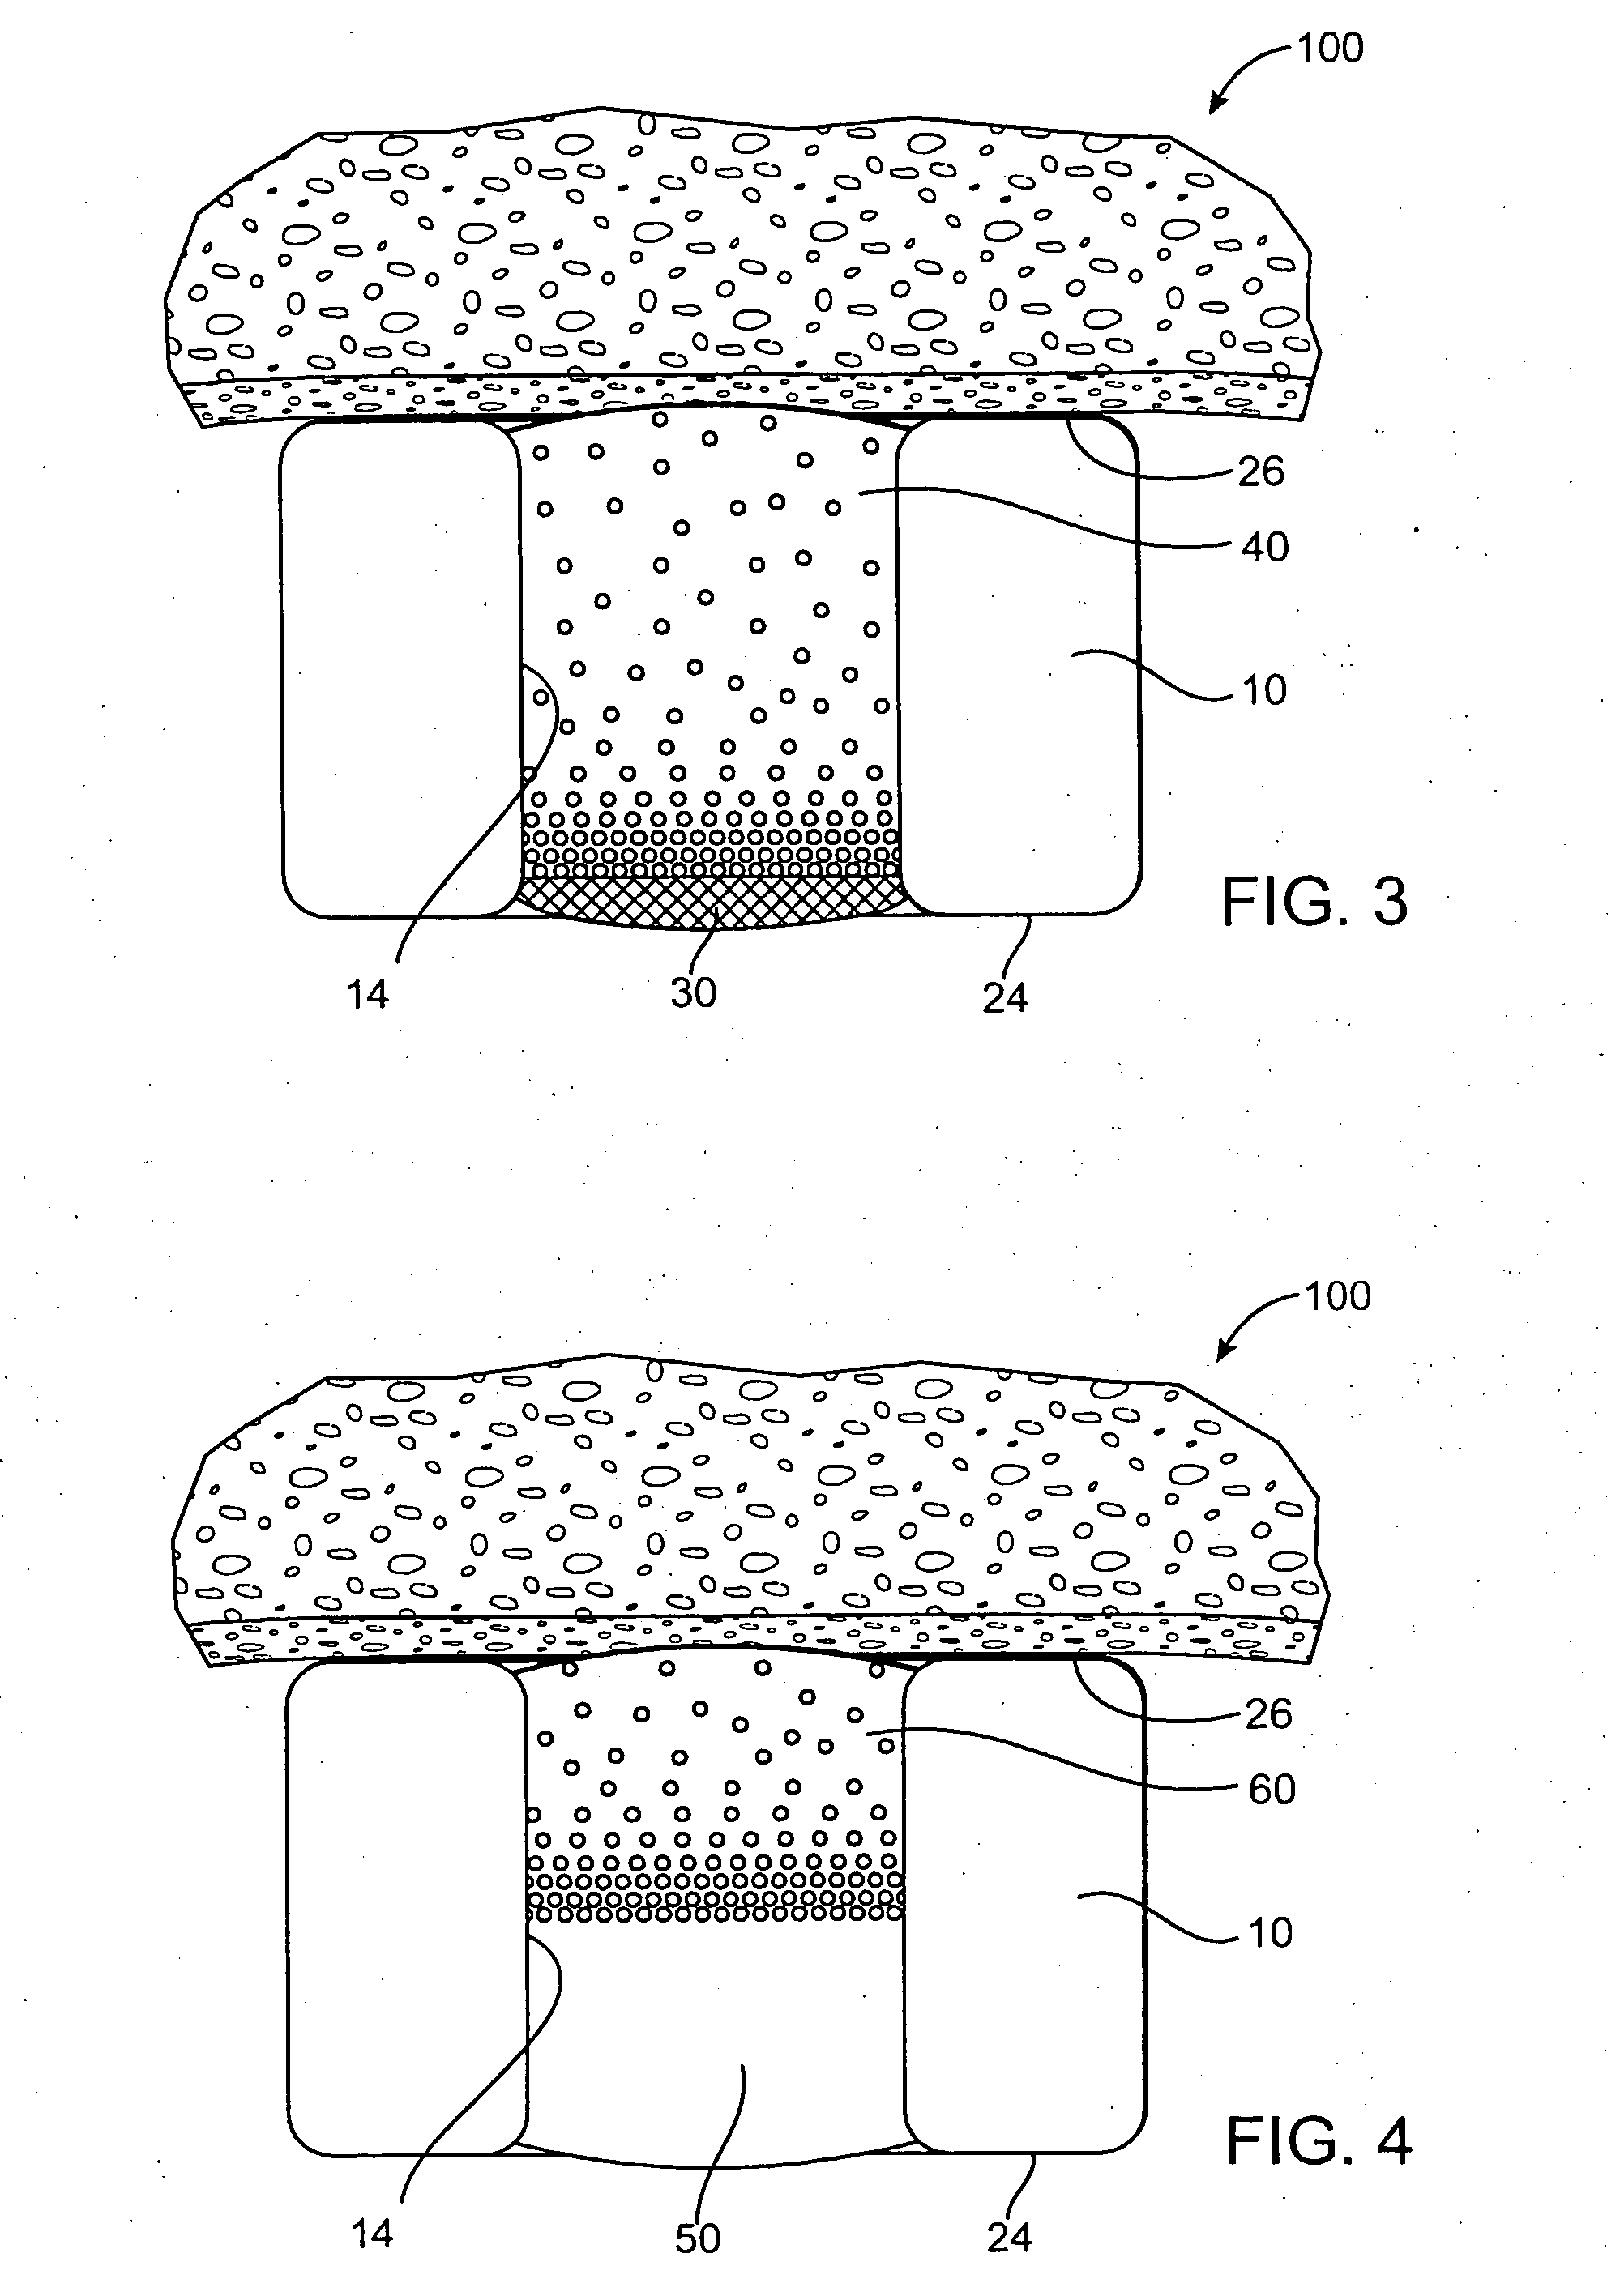 Methods of delivering anti-restenotic agents from a stent